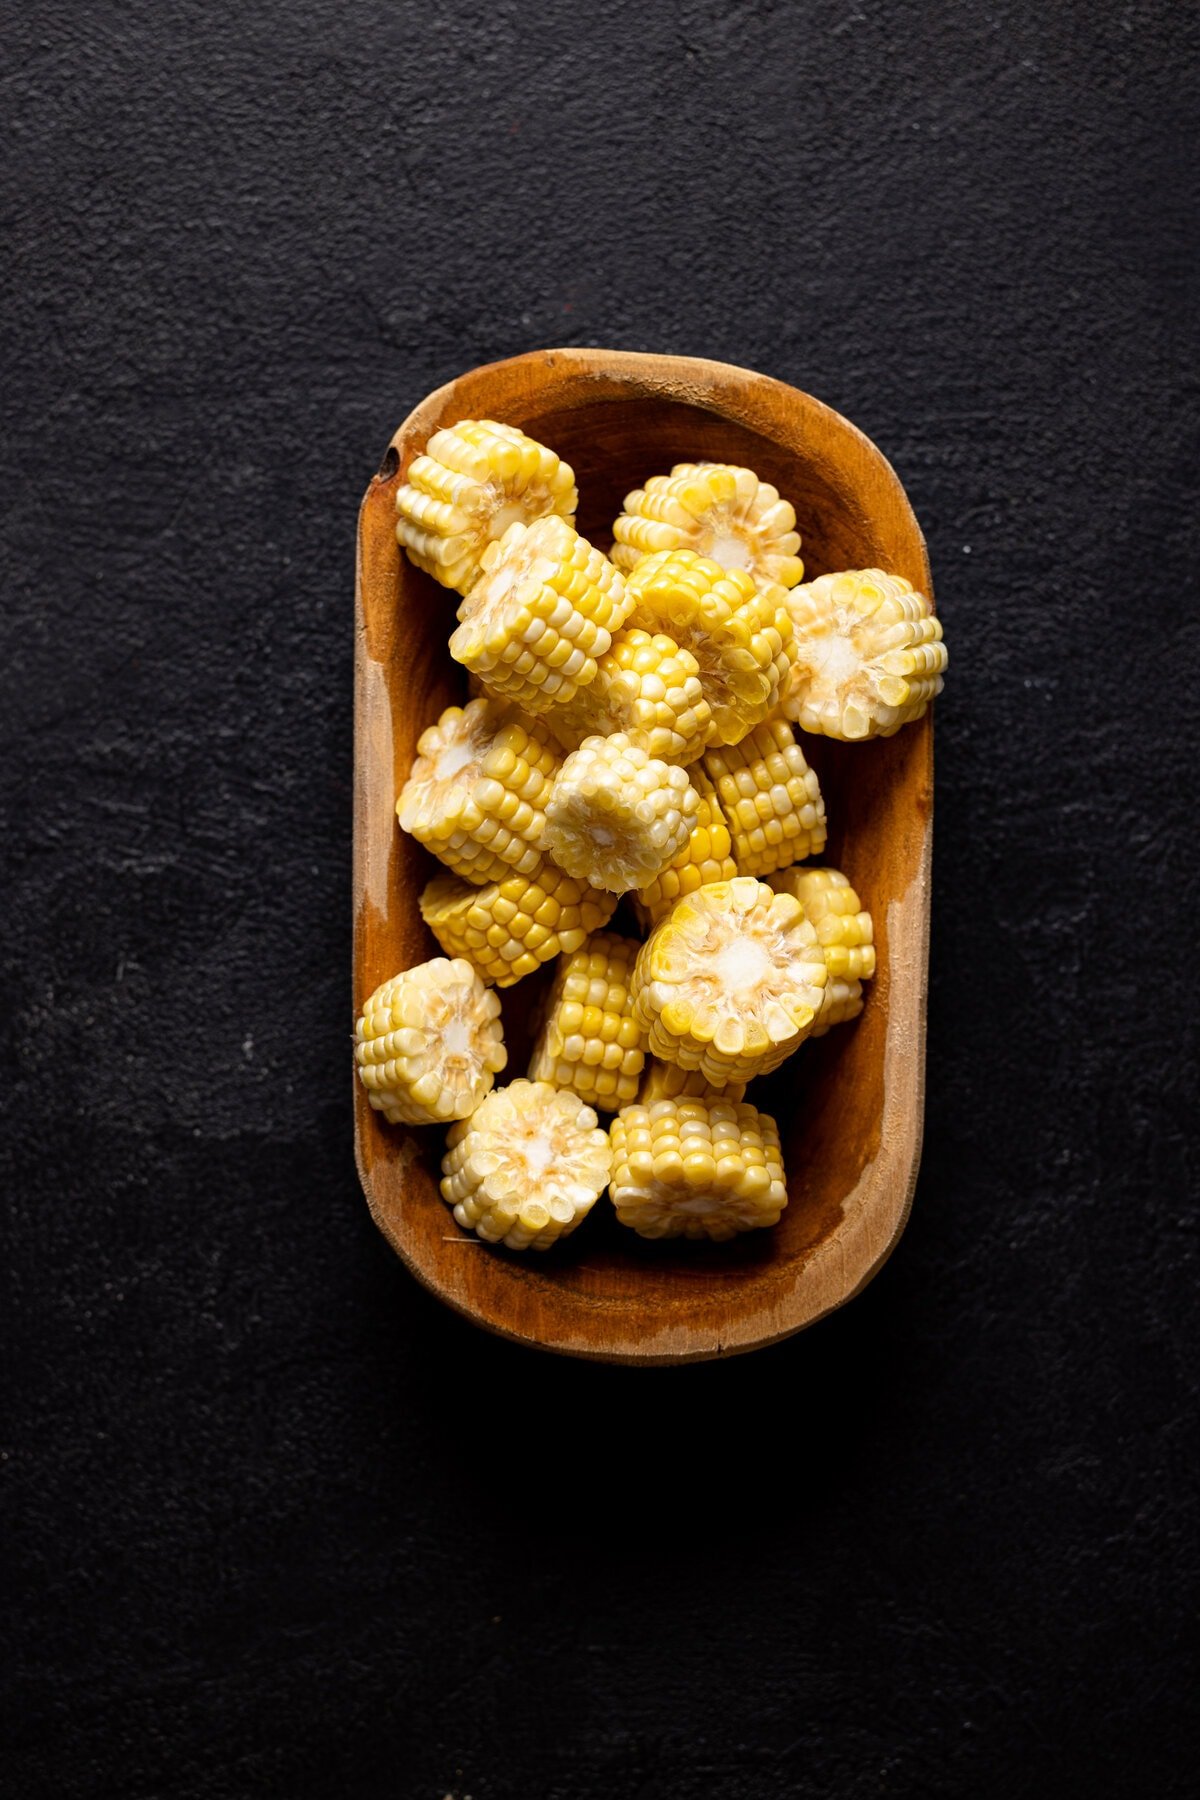 Chopped corn in a brown bowl on a black table.